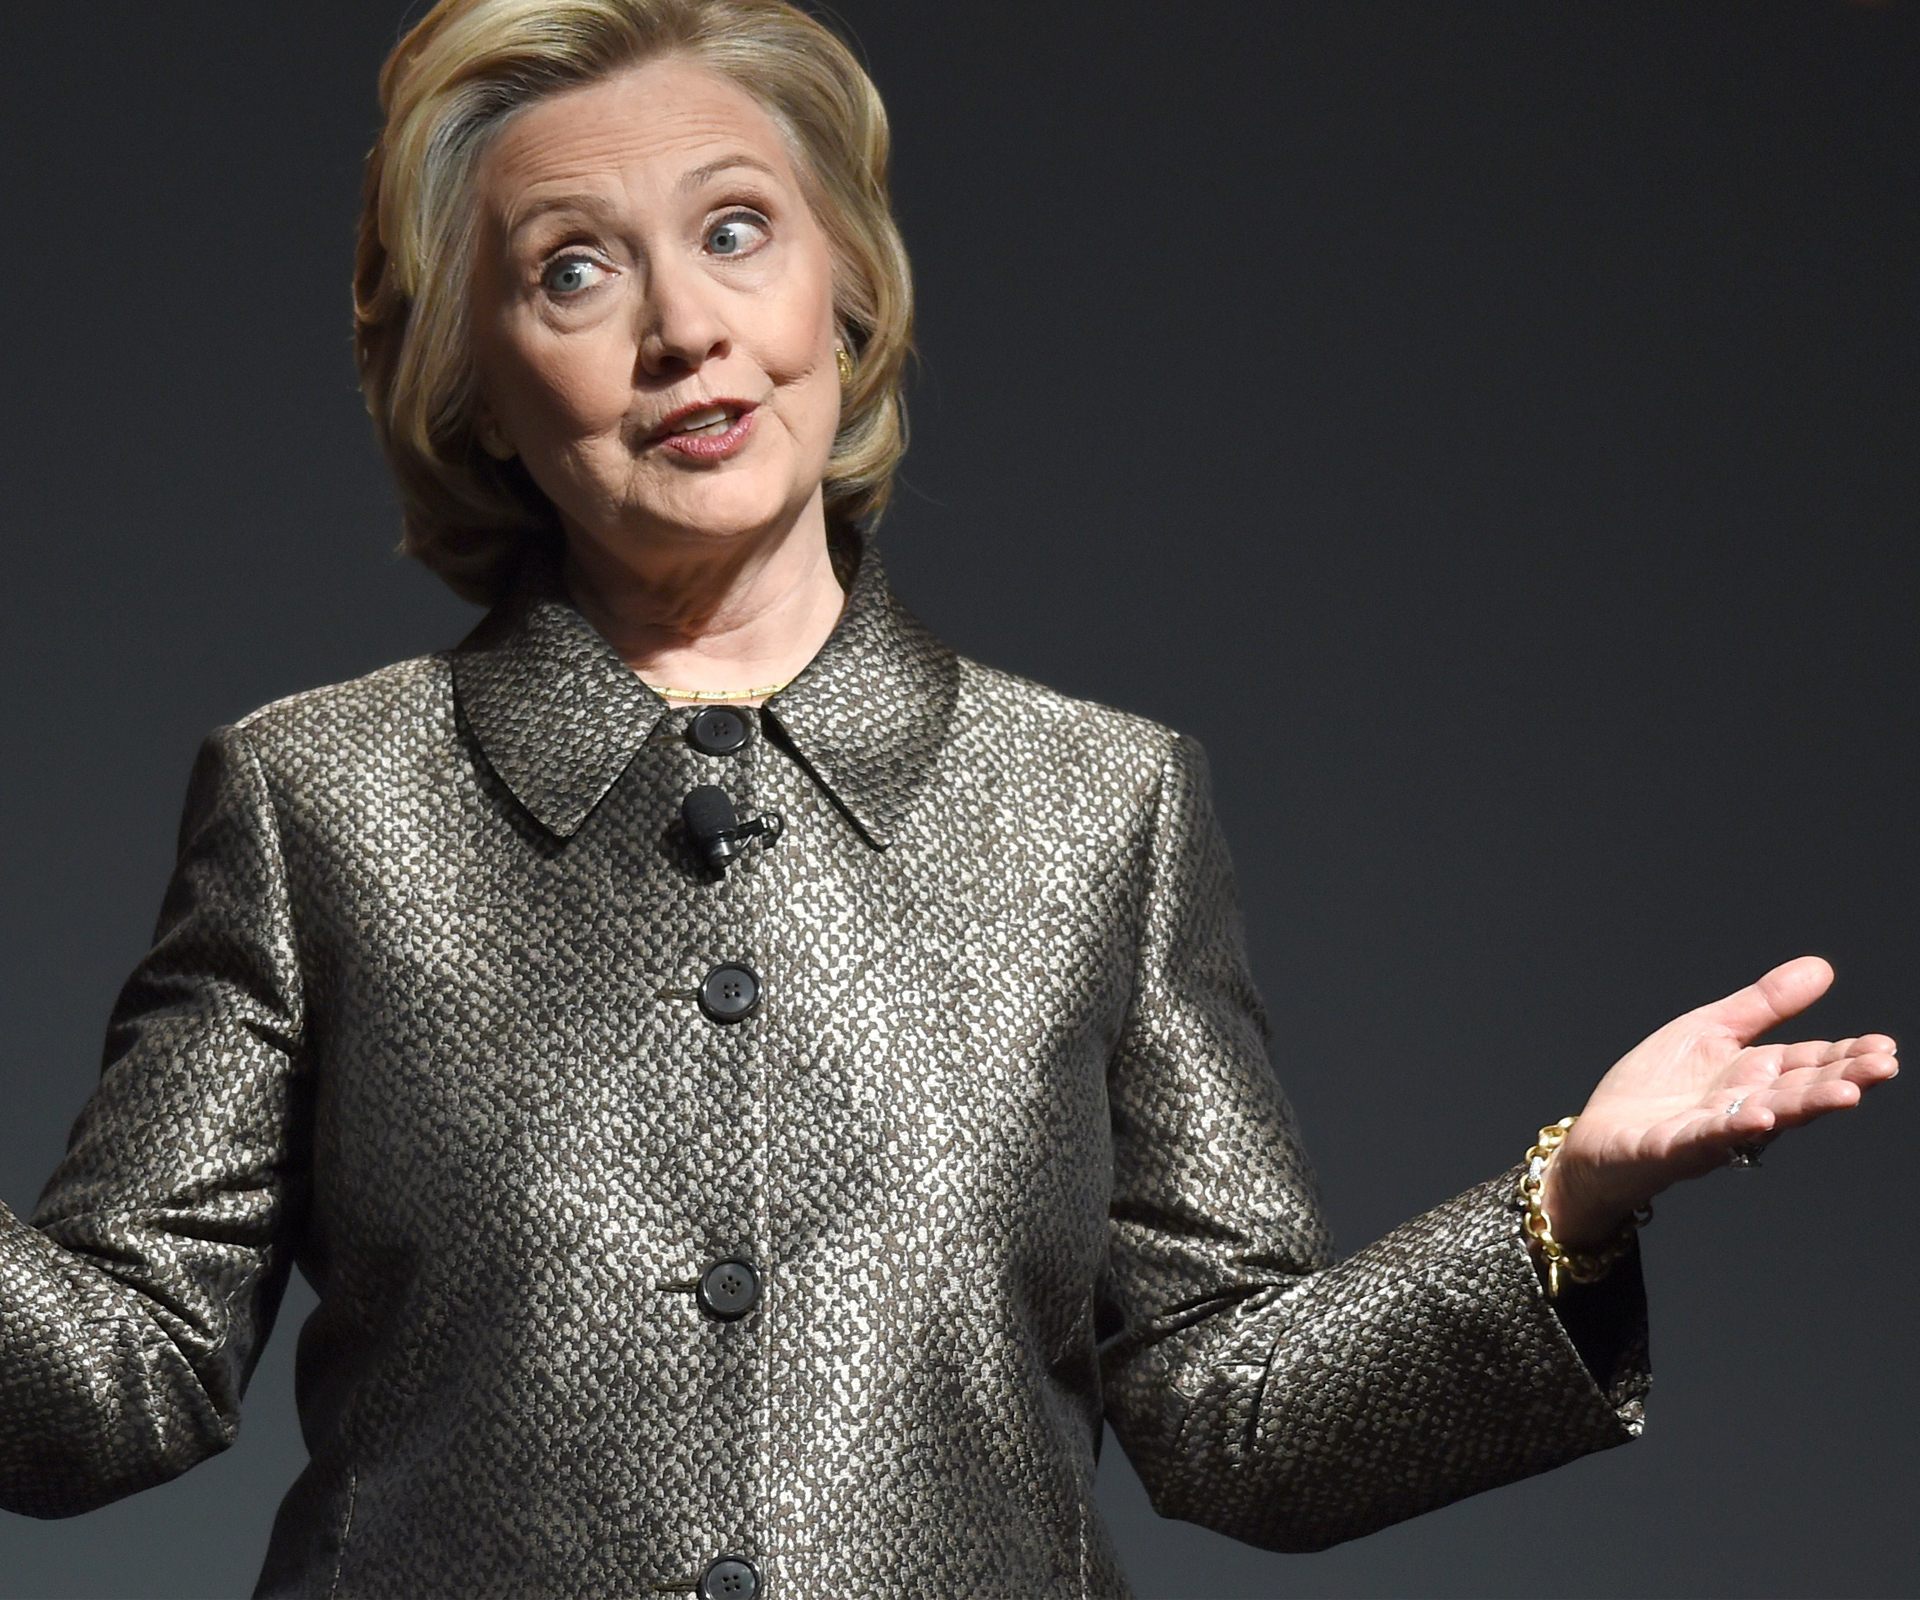 Hillary Clinton: “You won’t see me go grey in the White House”